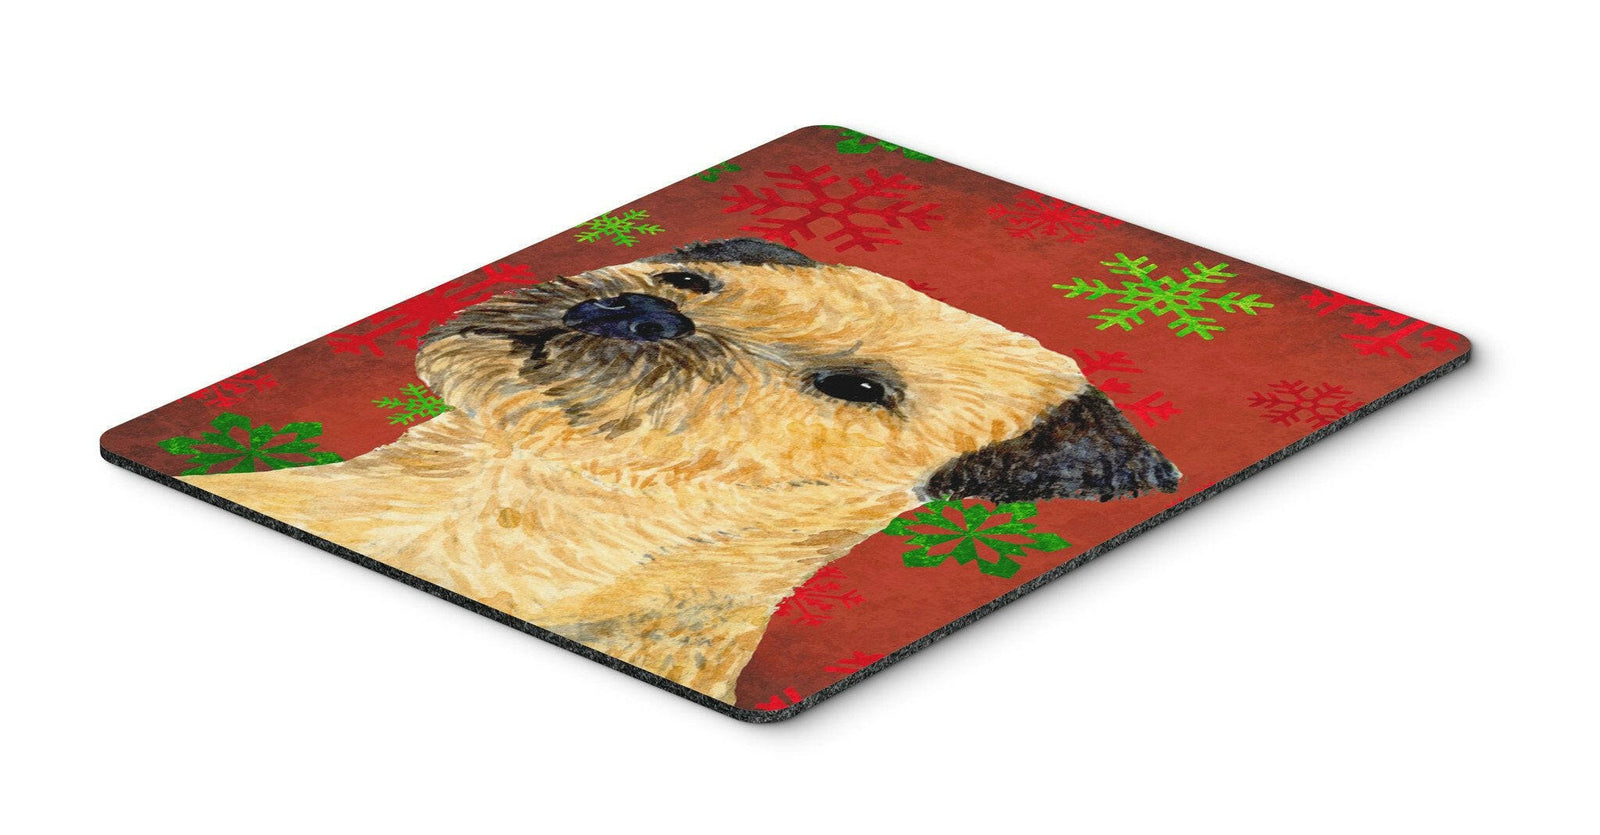 Border Terrier Red and Green Snowflakes Christmas Mouse Pad, Hot Pad or Trivet by Caroline's Treasures